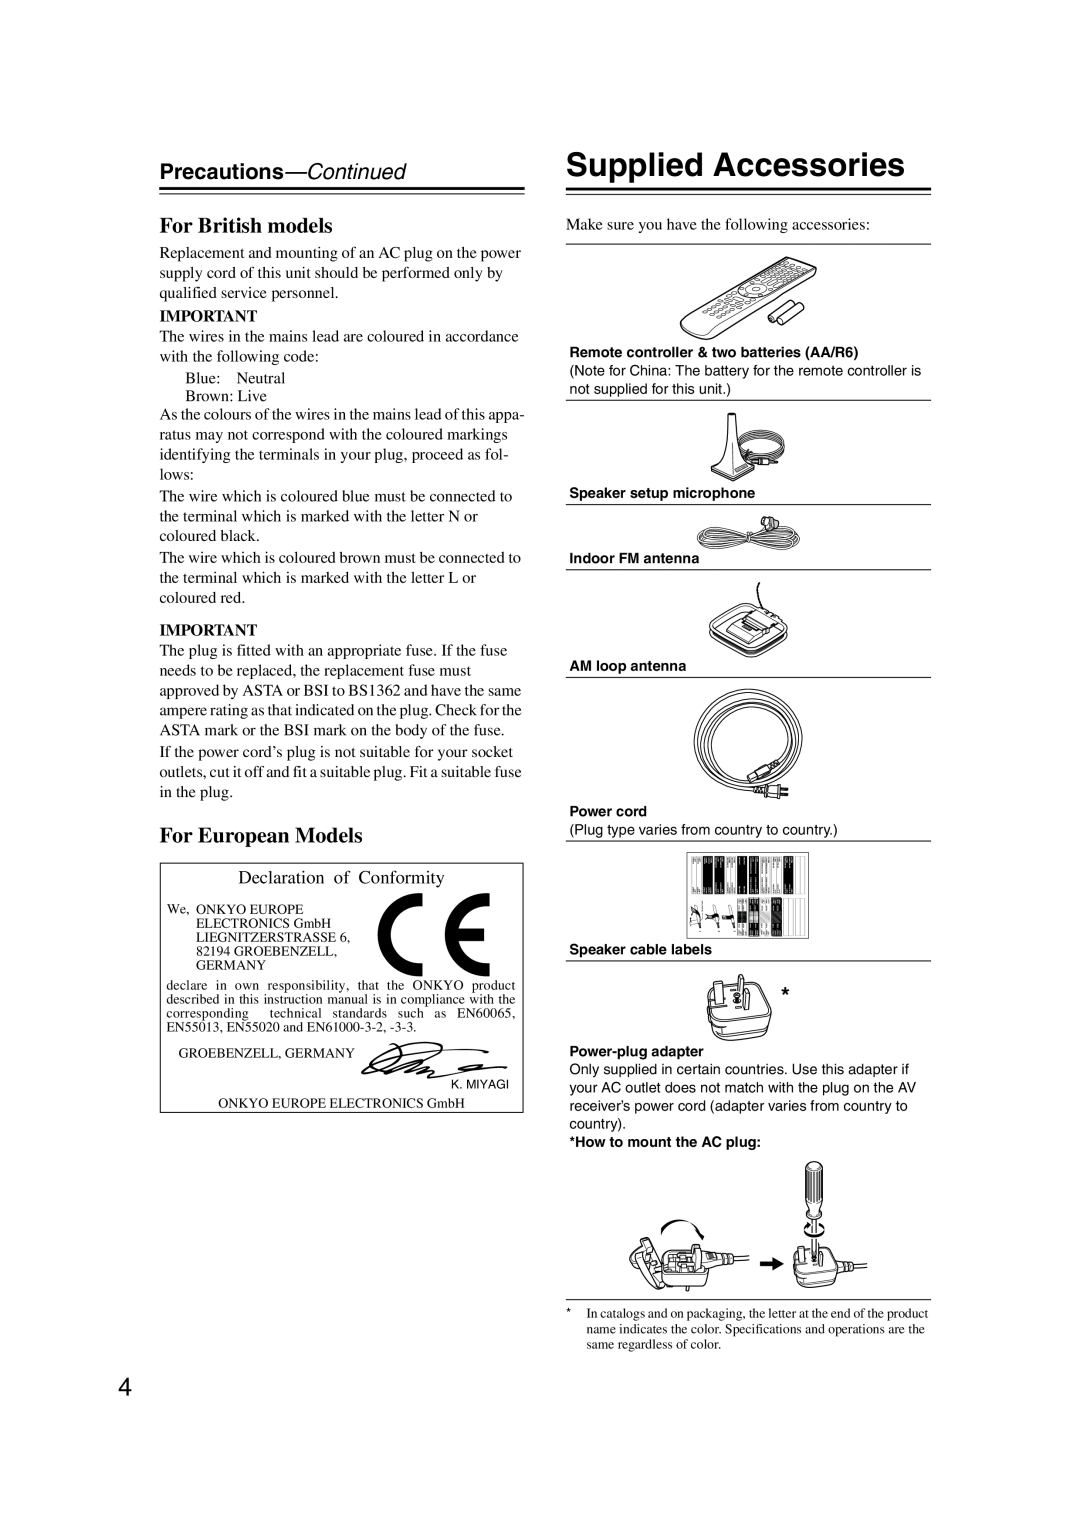 Onkyo HT-RC180, 29400021, TX-NR807 Supplied Accessories, Precautions—Continued, For British models, For European Models 